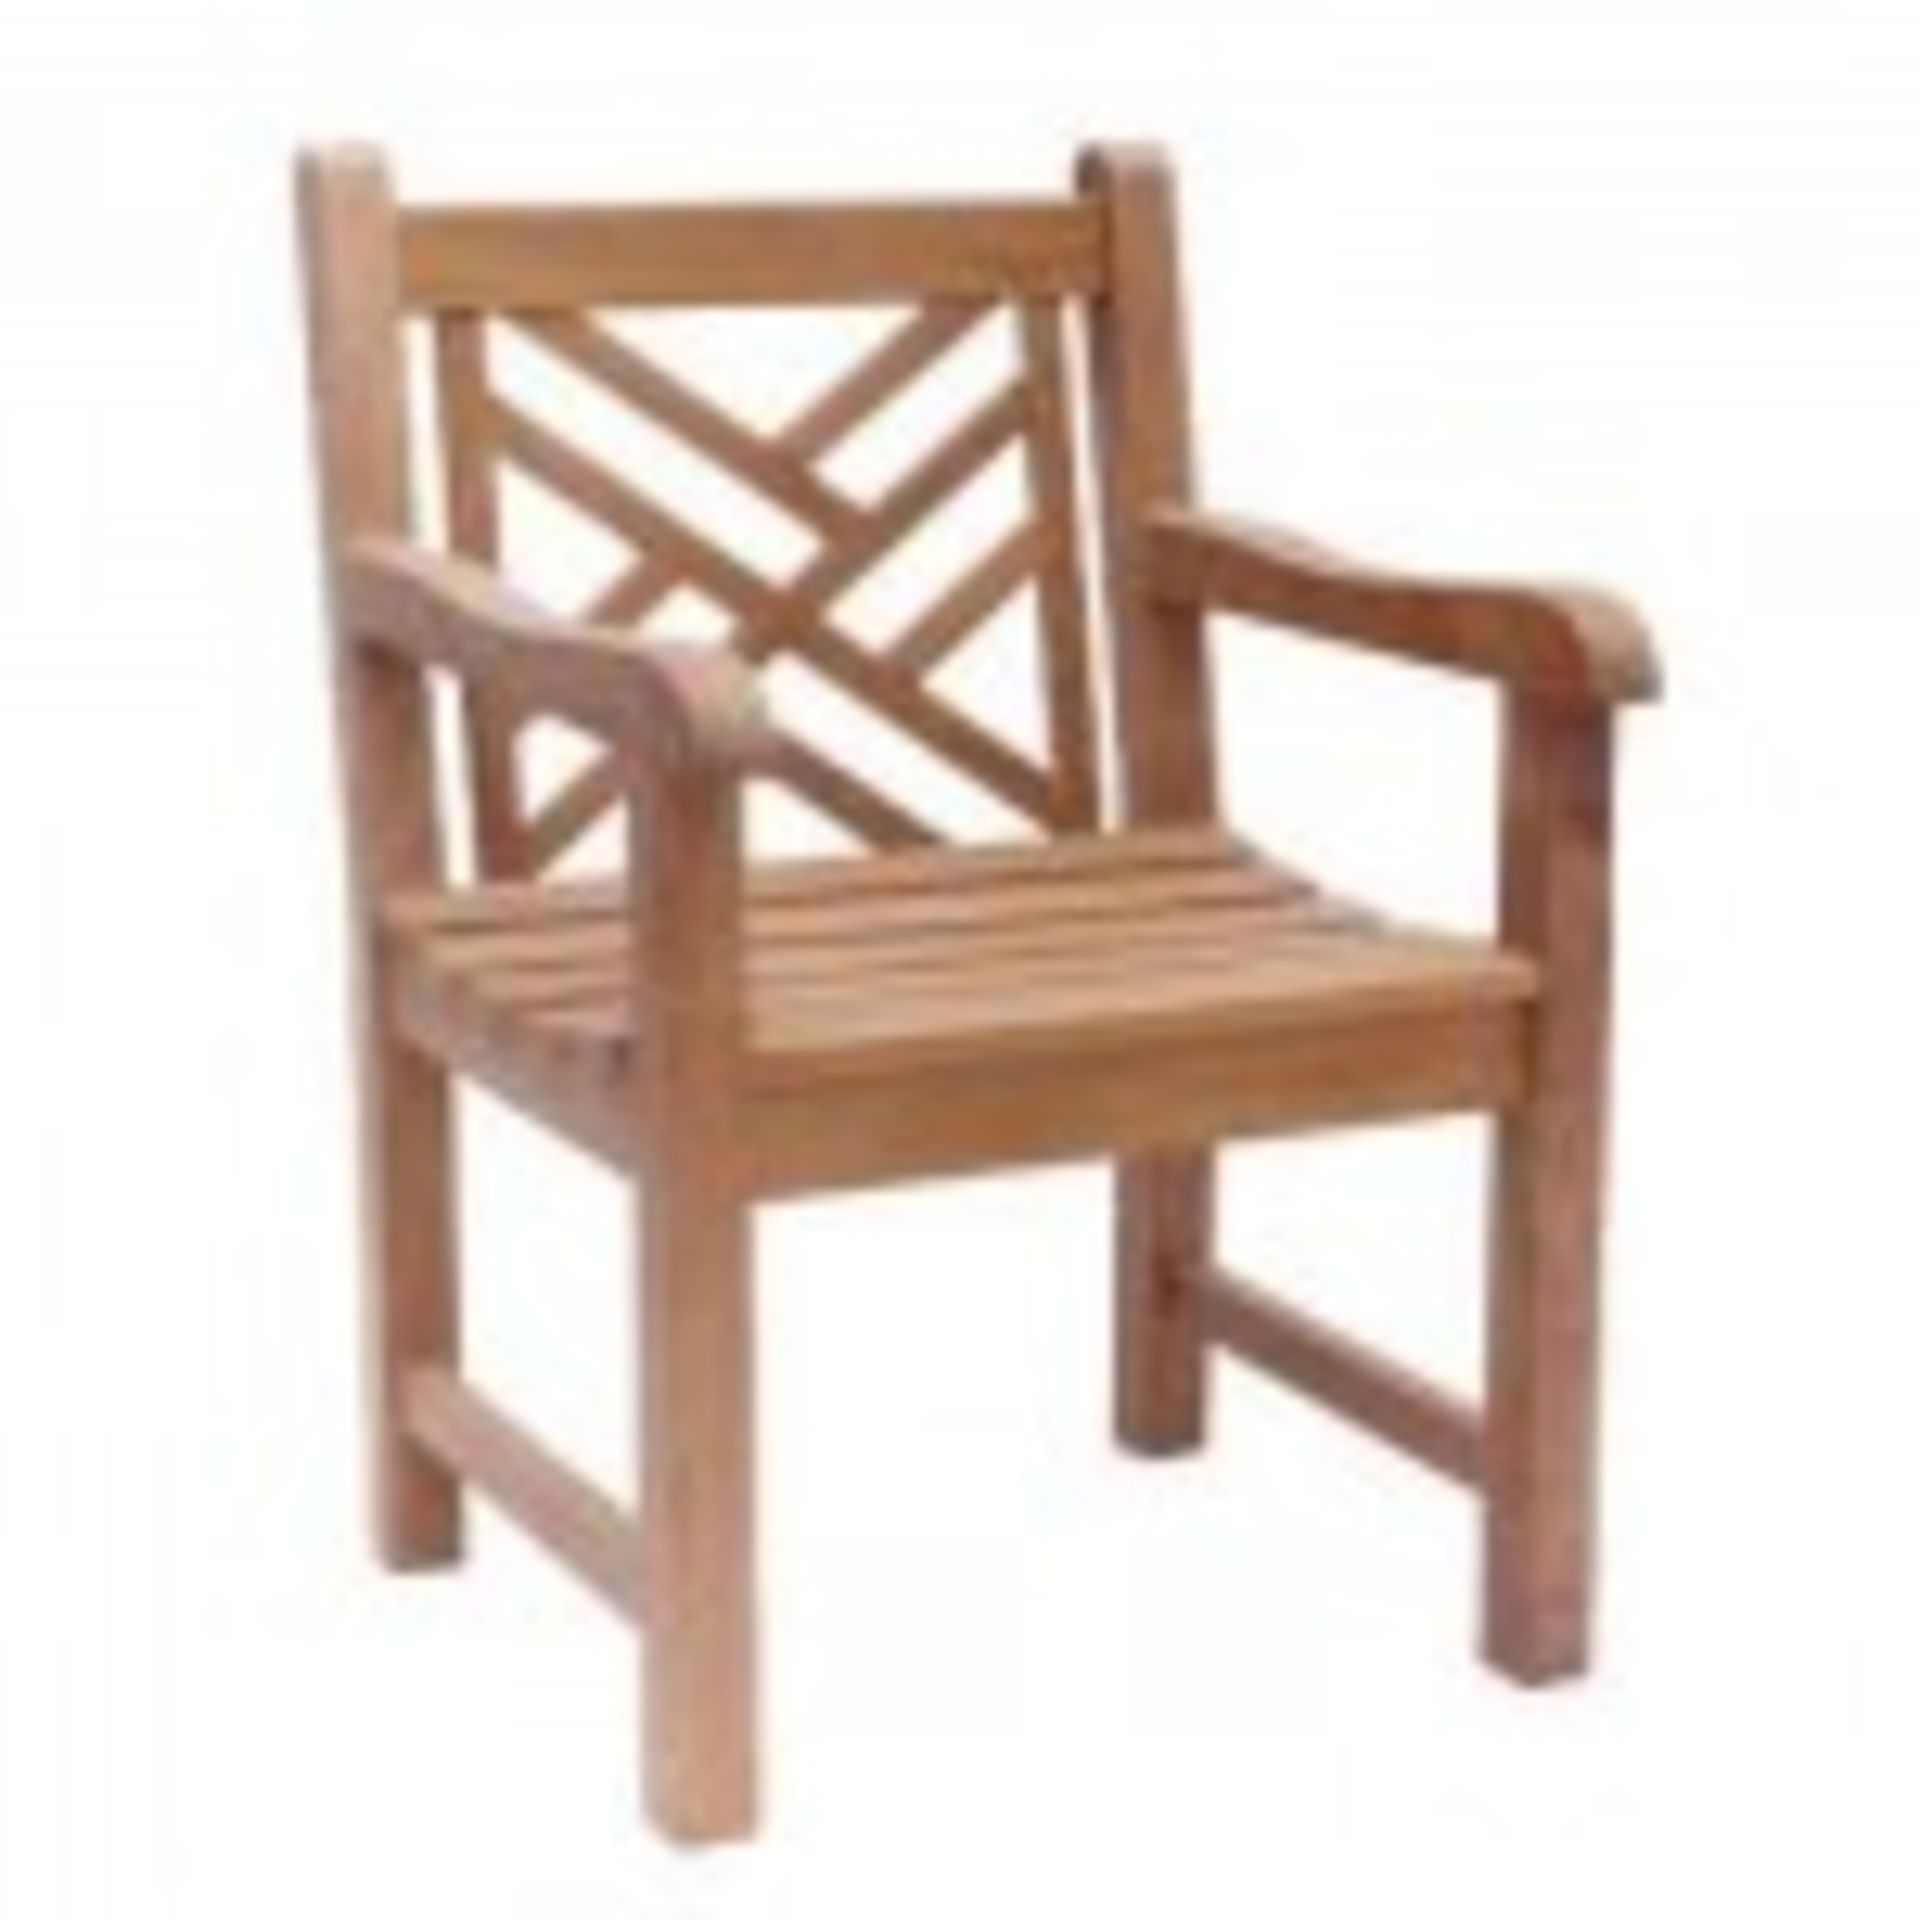 V Brand New Teak Crossback Arm Chair / dimensions 61cm x 66cm x 94cm NOTE: Item Is Available